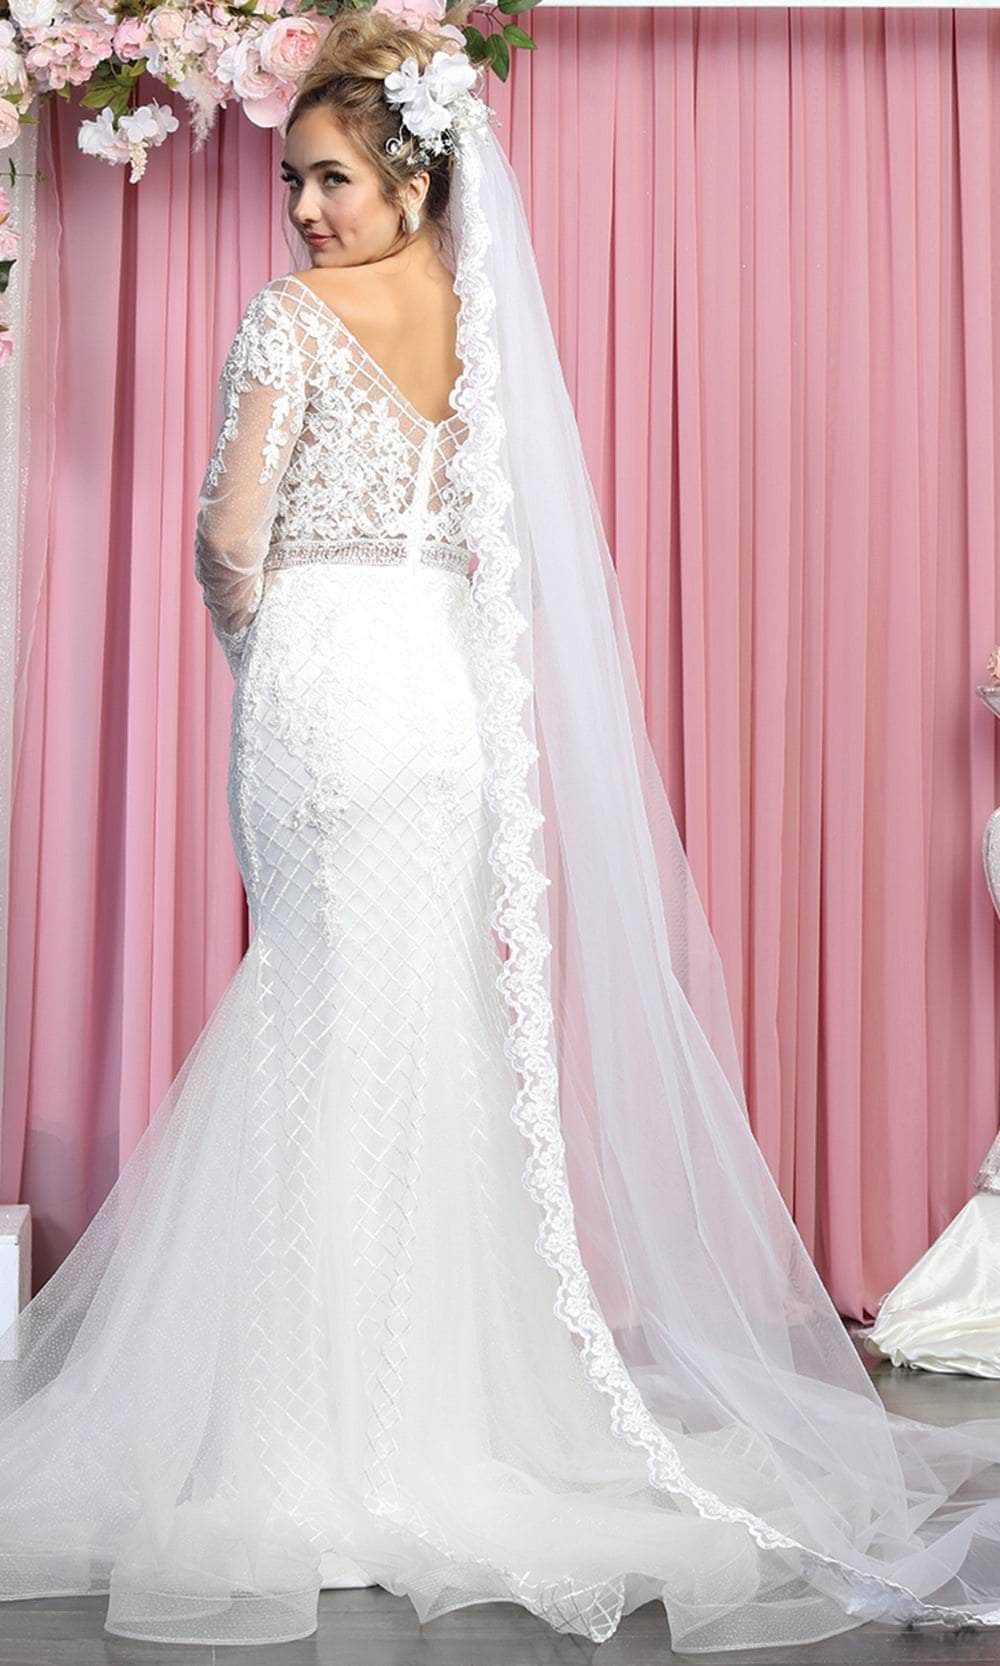 May Queen, May Queen RQ7896 - Long Sleeves Sheer V-neck Wedding Gown